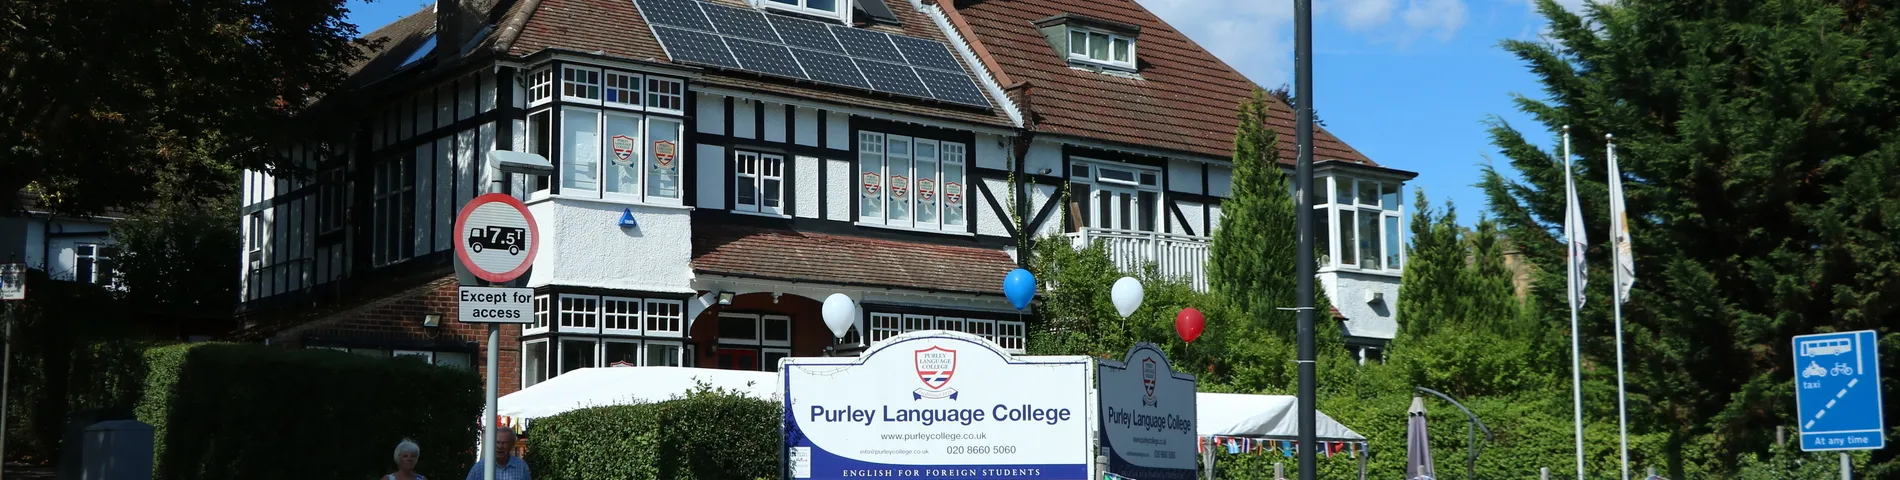 Purley Language College afbeelding 1